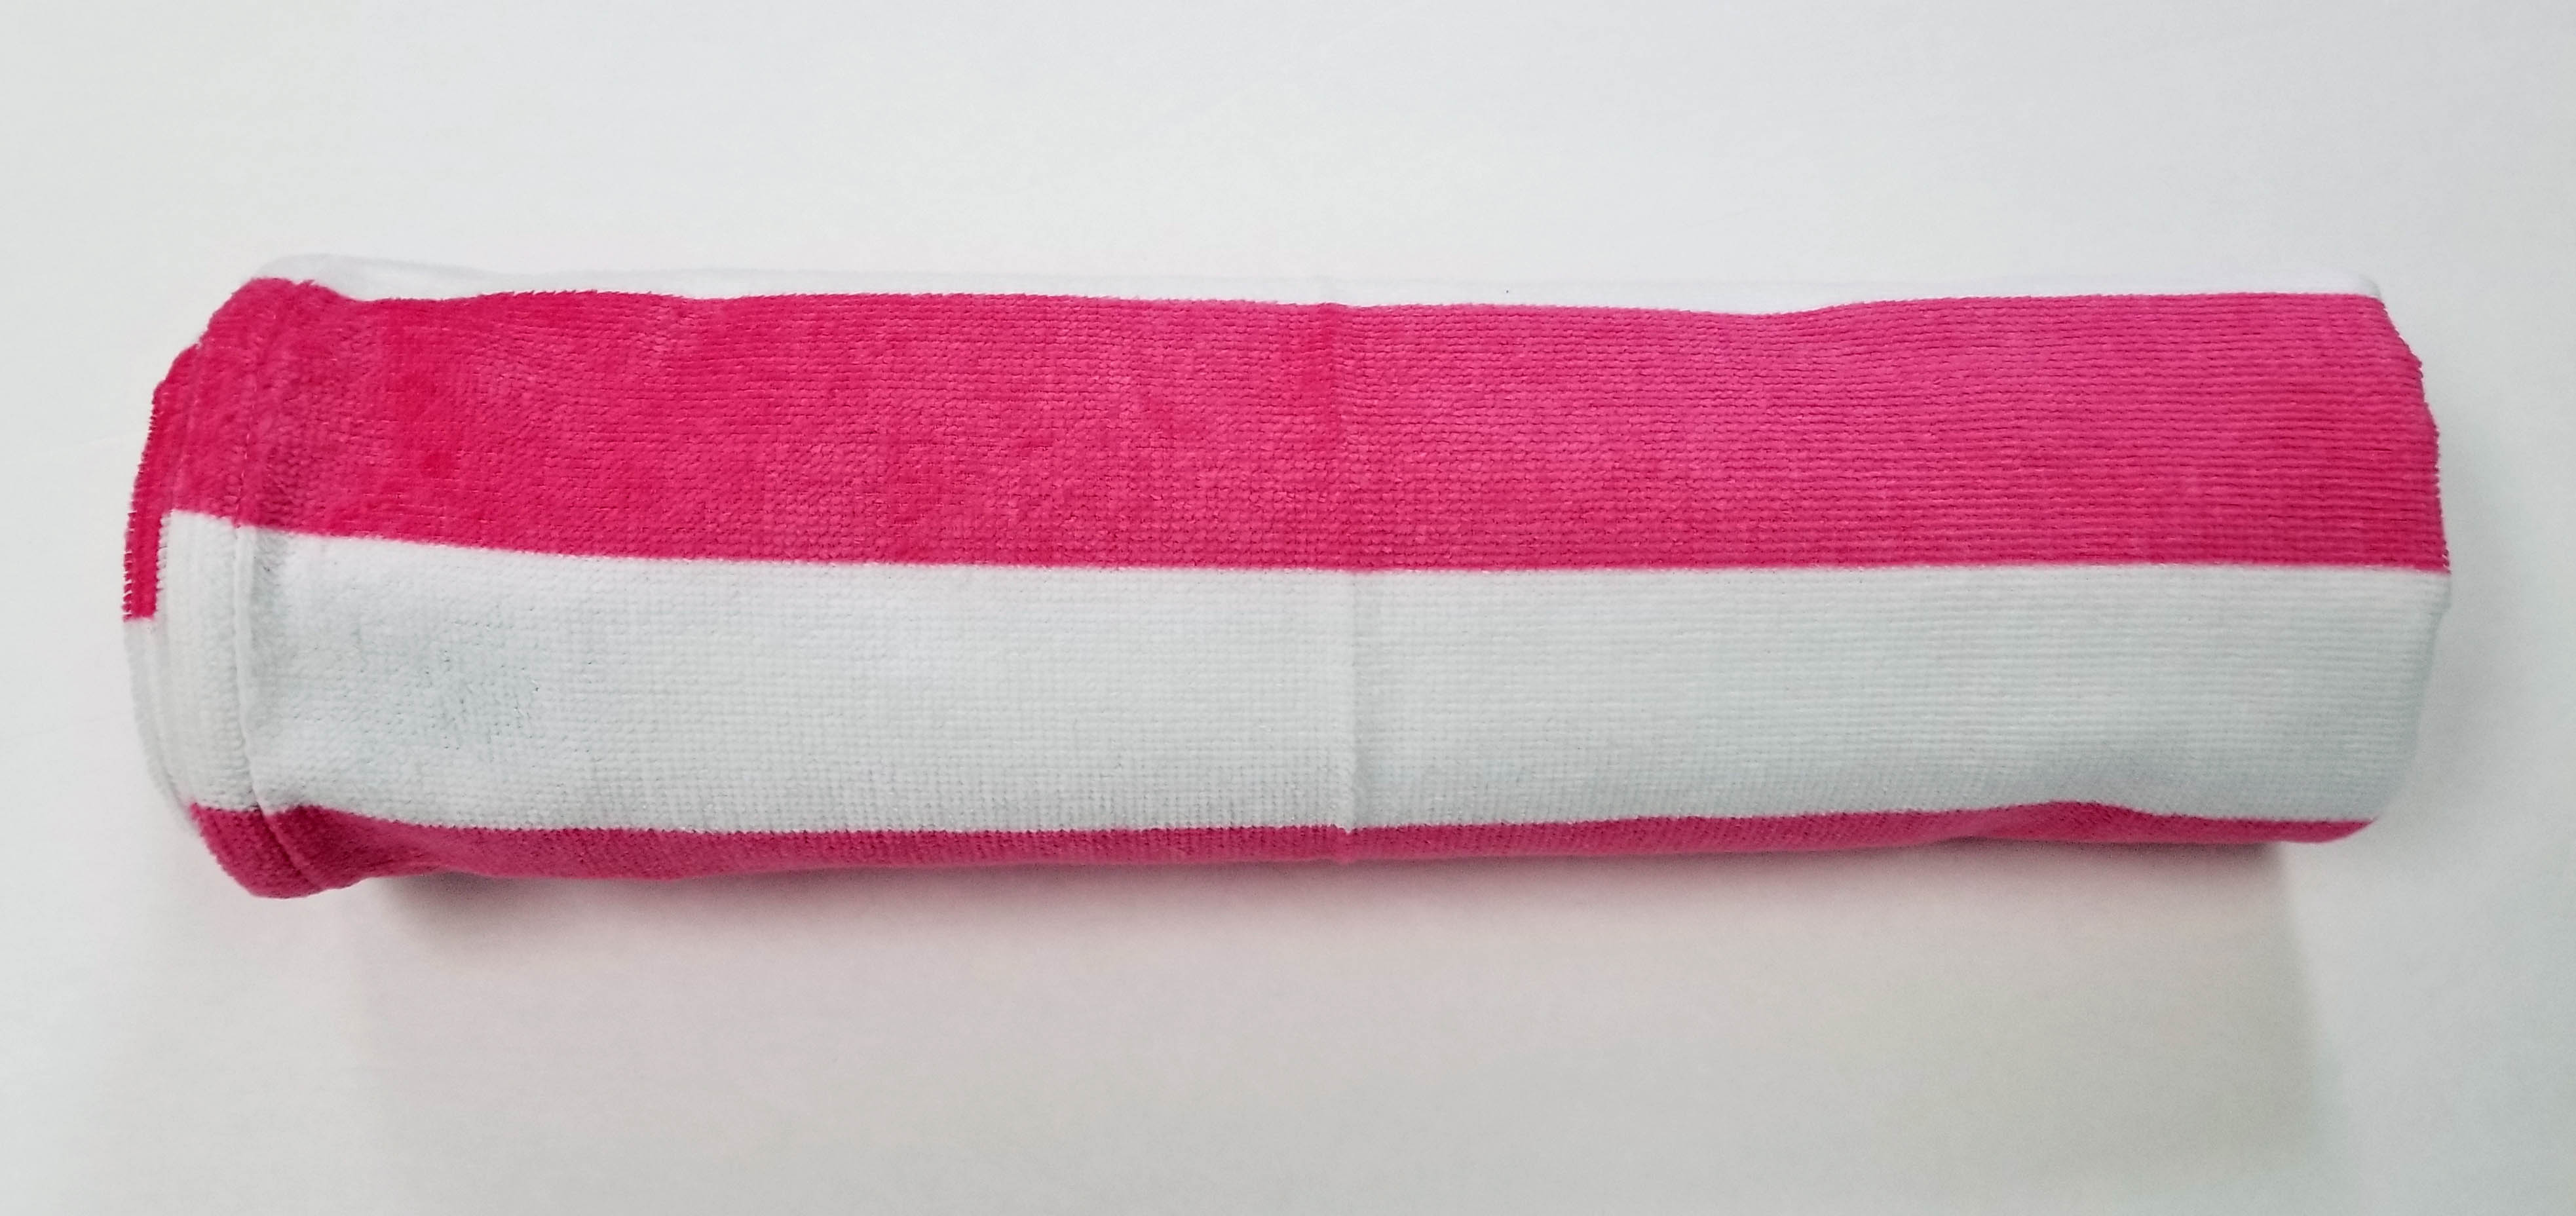 EMBROIDERED 30x60 Pink Cabana Striped Beach Towel Bahia Collection by Dolhler.